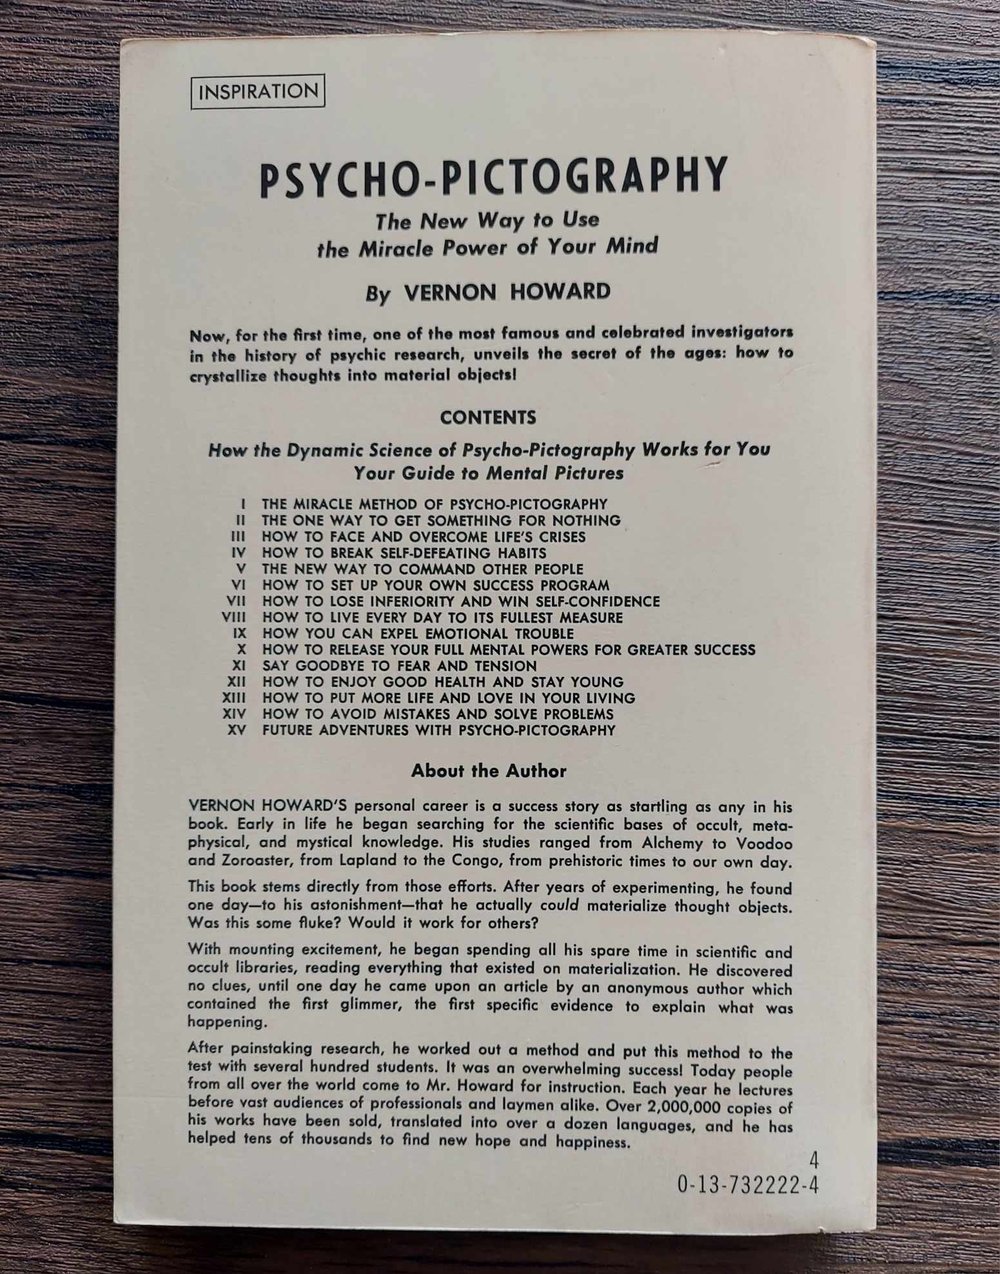 Psycho-Pictography: The New Way to Use the Miracle Power of Your Mind, by Vernon Howard